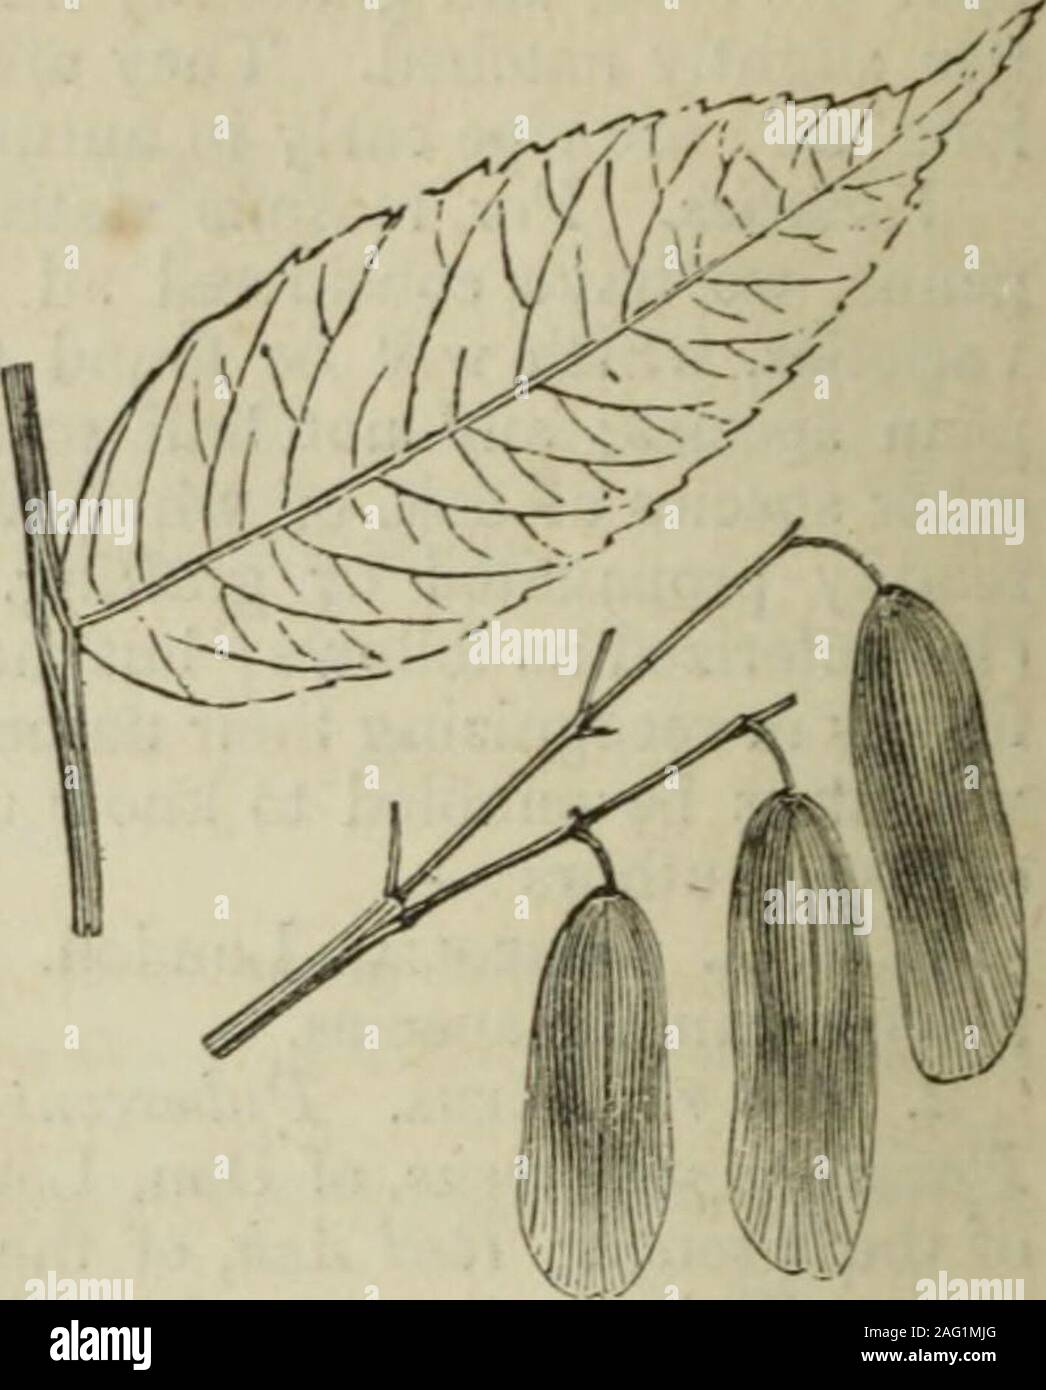 . www.flickr.com/photos/internetarchivebookimages/tags/book.... 396 FRAXINUS AMERICANA.. 4. F. A. SAMEUCIFOLIA. Elder-Icaved American Ash; Fraxiniis sambiicifolia^of Micliaux, Don, Loudon, and otiiers; Frene a feiiilles de sureai/, Frene noir,of the Frencli; Black Ash, Broivn Ash, Water Ash, of the Anglo-Americans.This tree, in favourable situations, frequentlyattains a height of seventy or eighty feet, witha trunk from two feet to two feet and a half indiameter. It is easily distinguished from thewhite ash by its bark, which is more inclined toa yellowish cast, is smoother, with the furrows,i Stock Photo